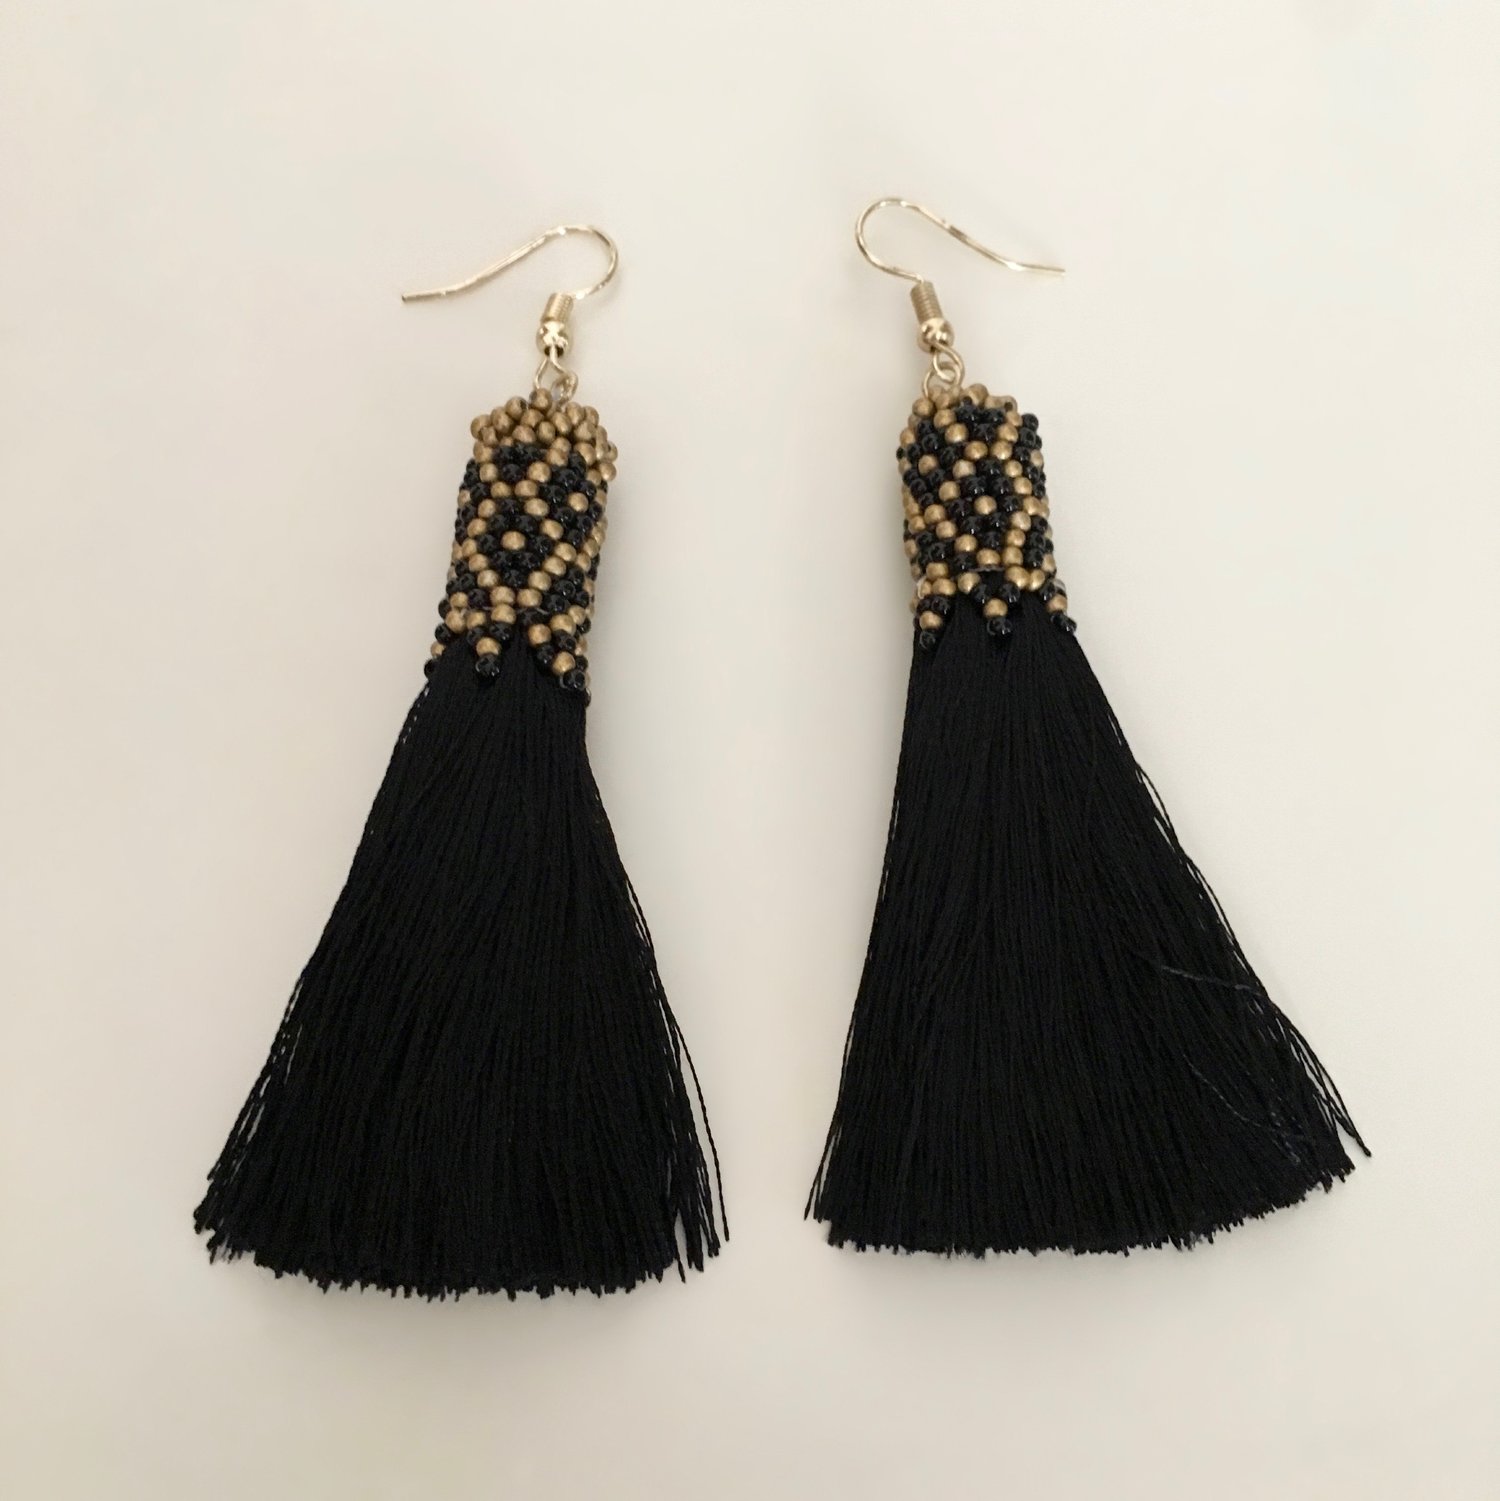 Multi Coloured Tassel Earrings with Gold Beads